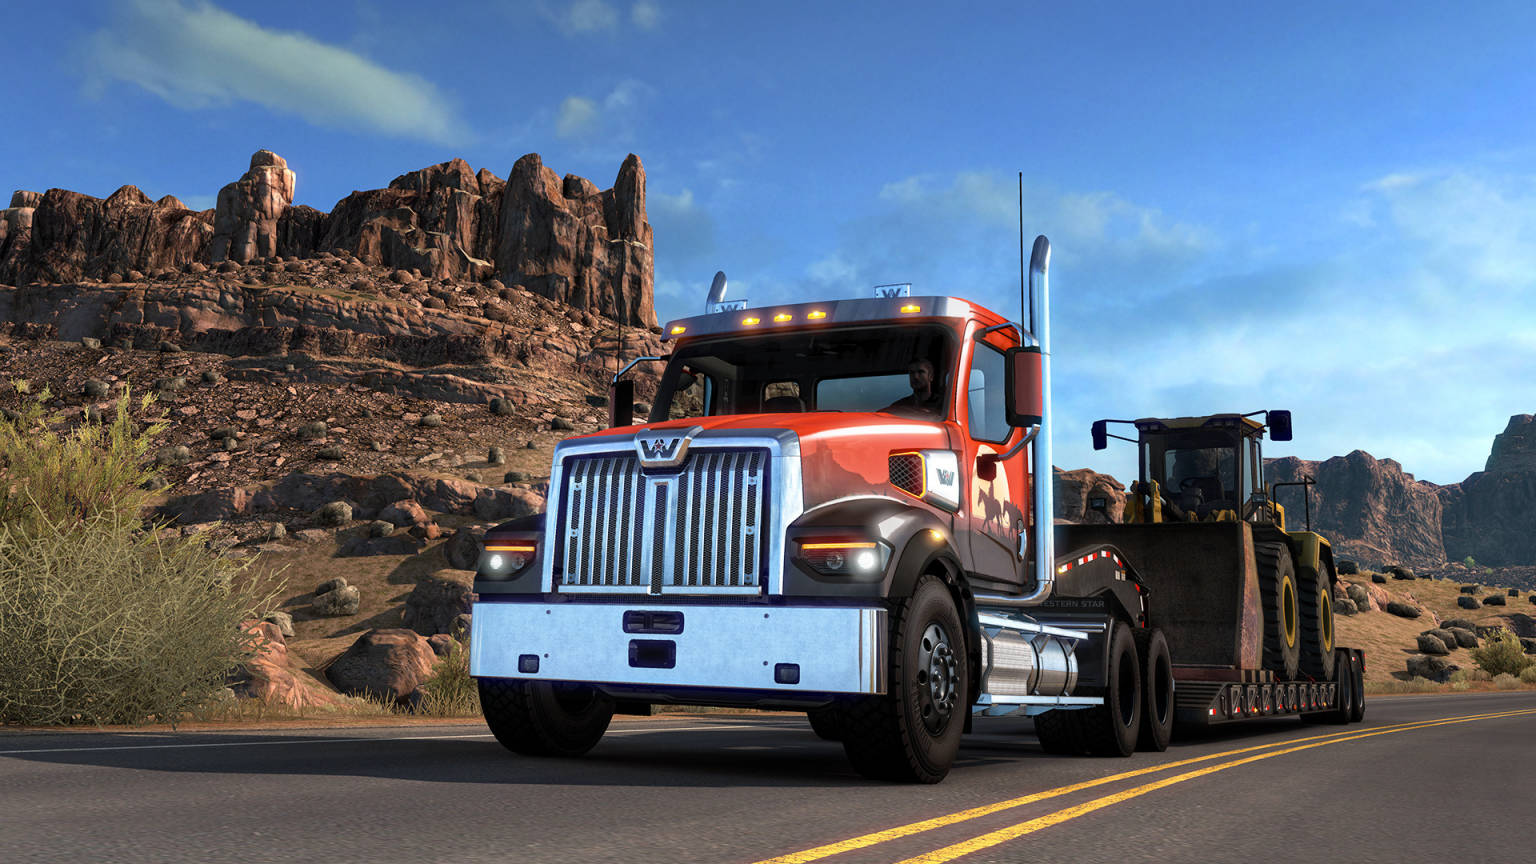 American Truck Simulator: The Open Road Background